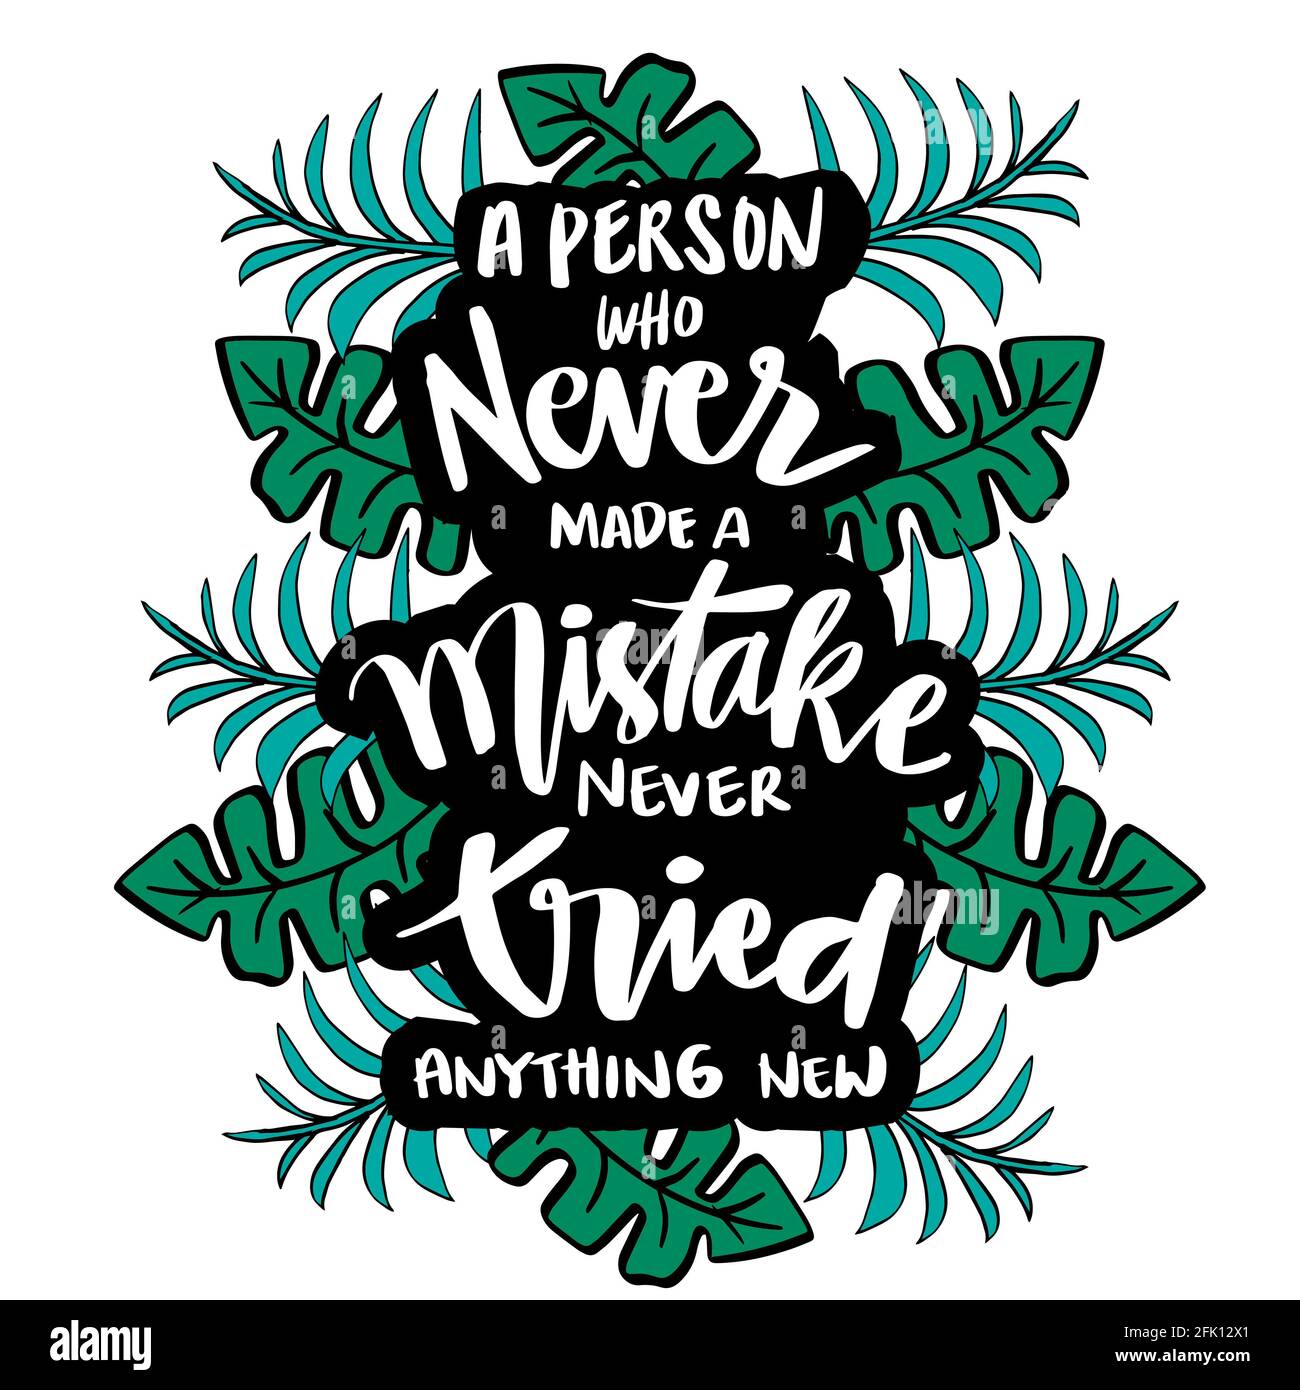 A person who never made a mistake never tried anything new. Albert Einstein Quotes Stock Photo